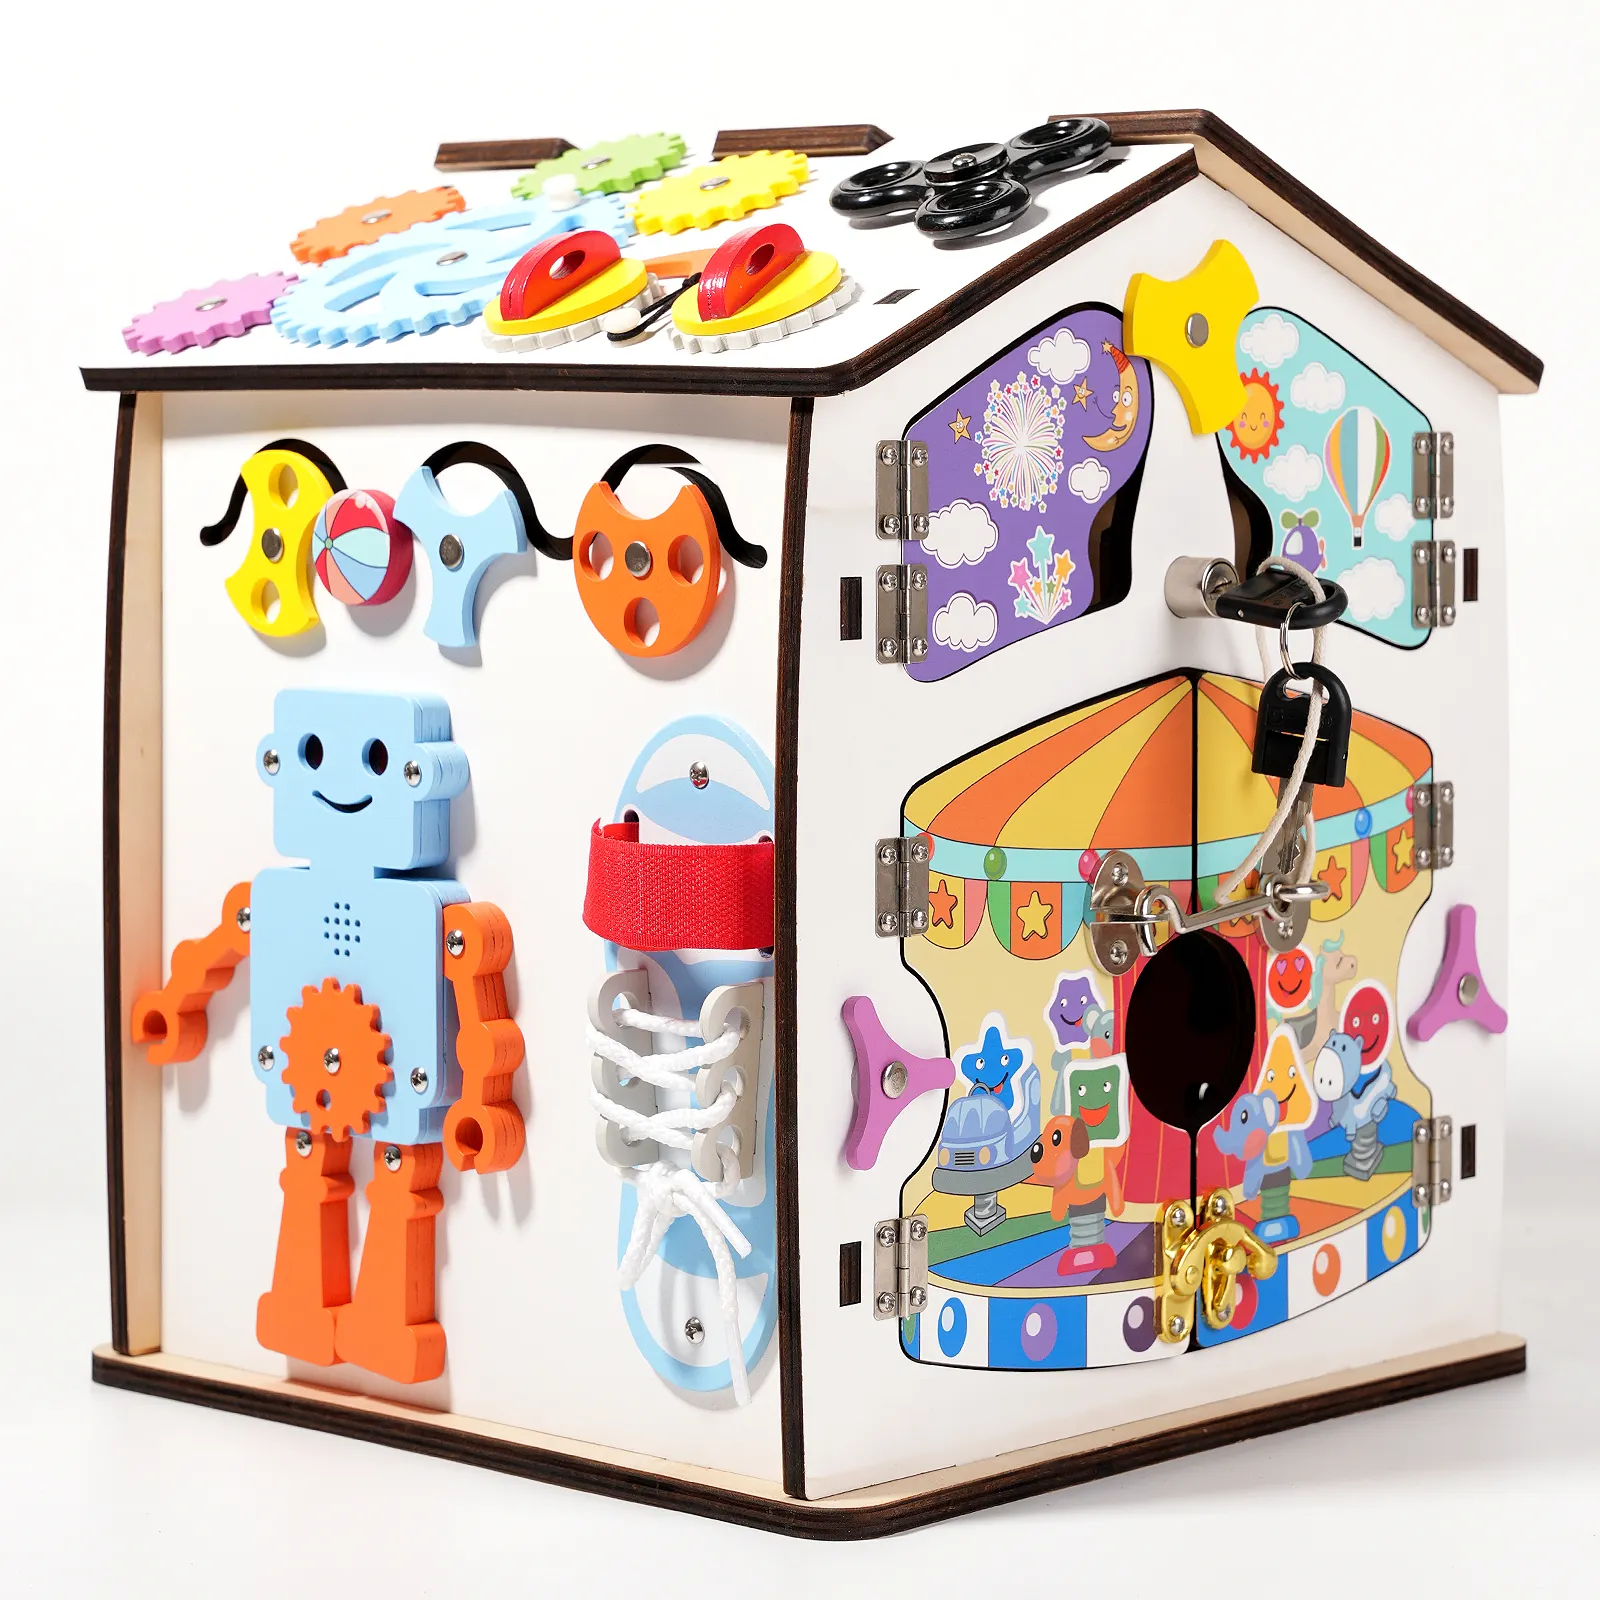 Wholesale Robot Busy House Busy Box Children Wooden Robot Gear Color Shape Matching Blocks